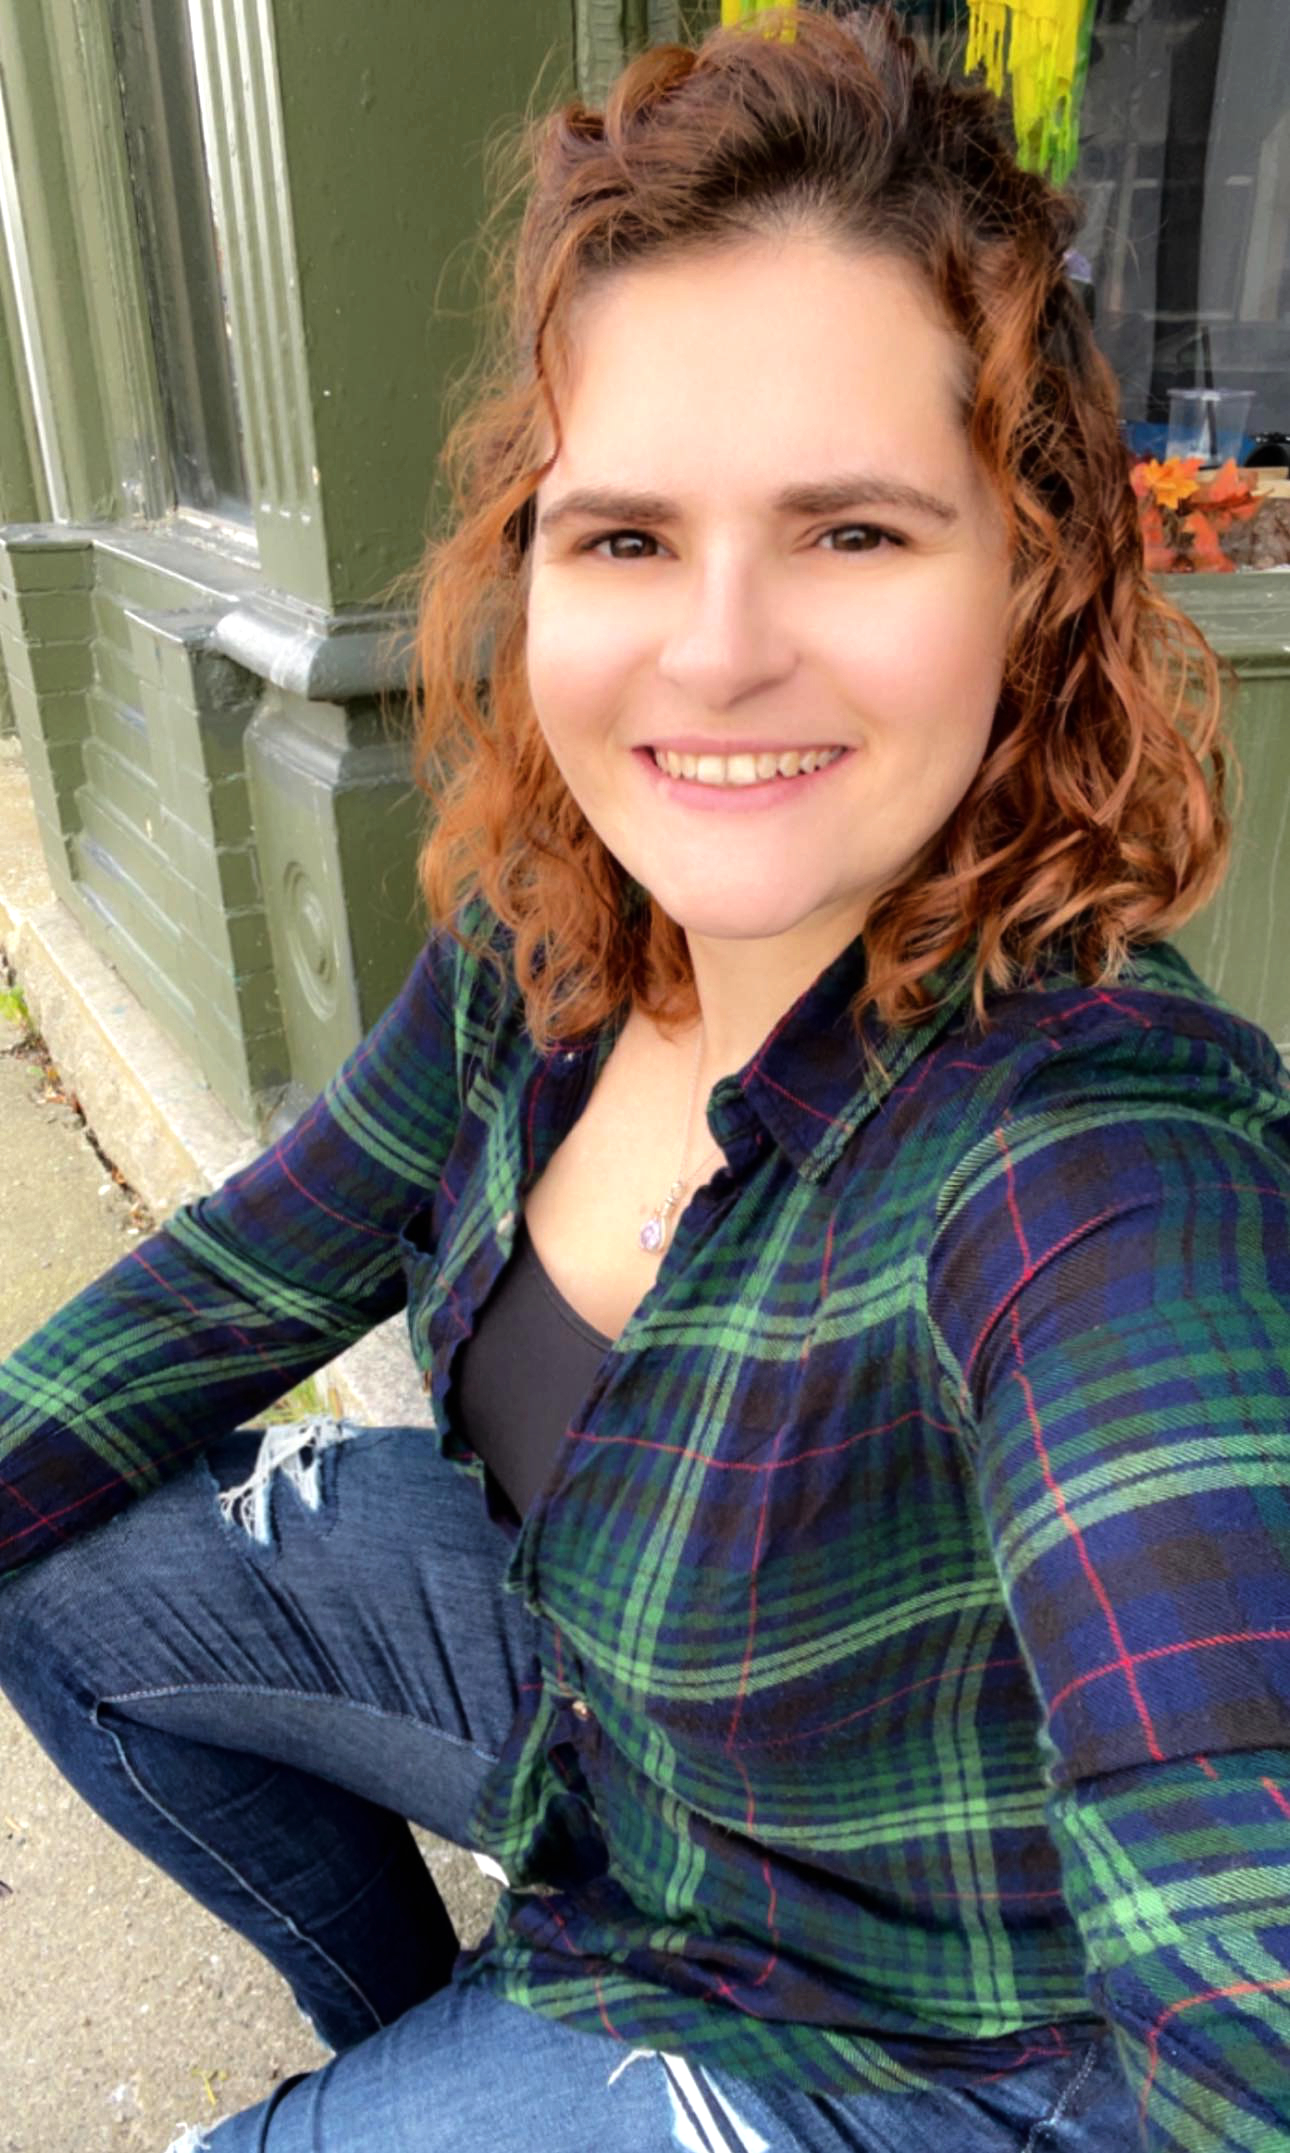 A smiling white woman with auburn hair and dark eyes wearing a blue and green flannel shirt.